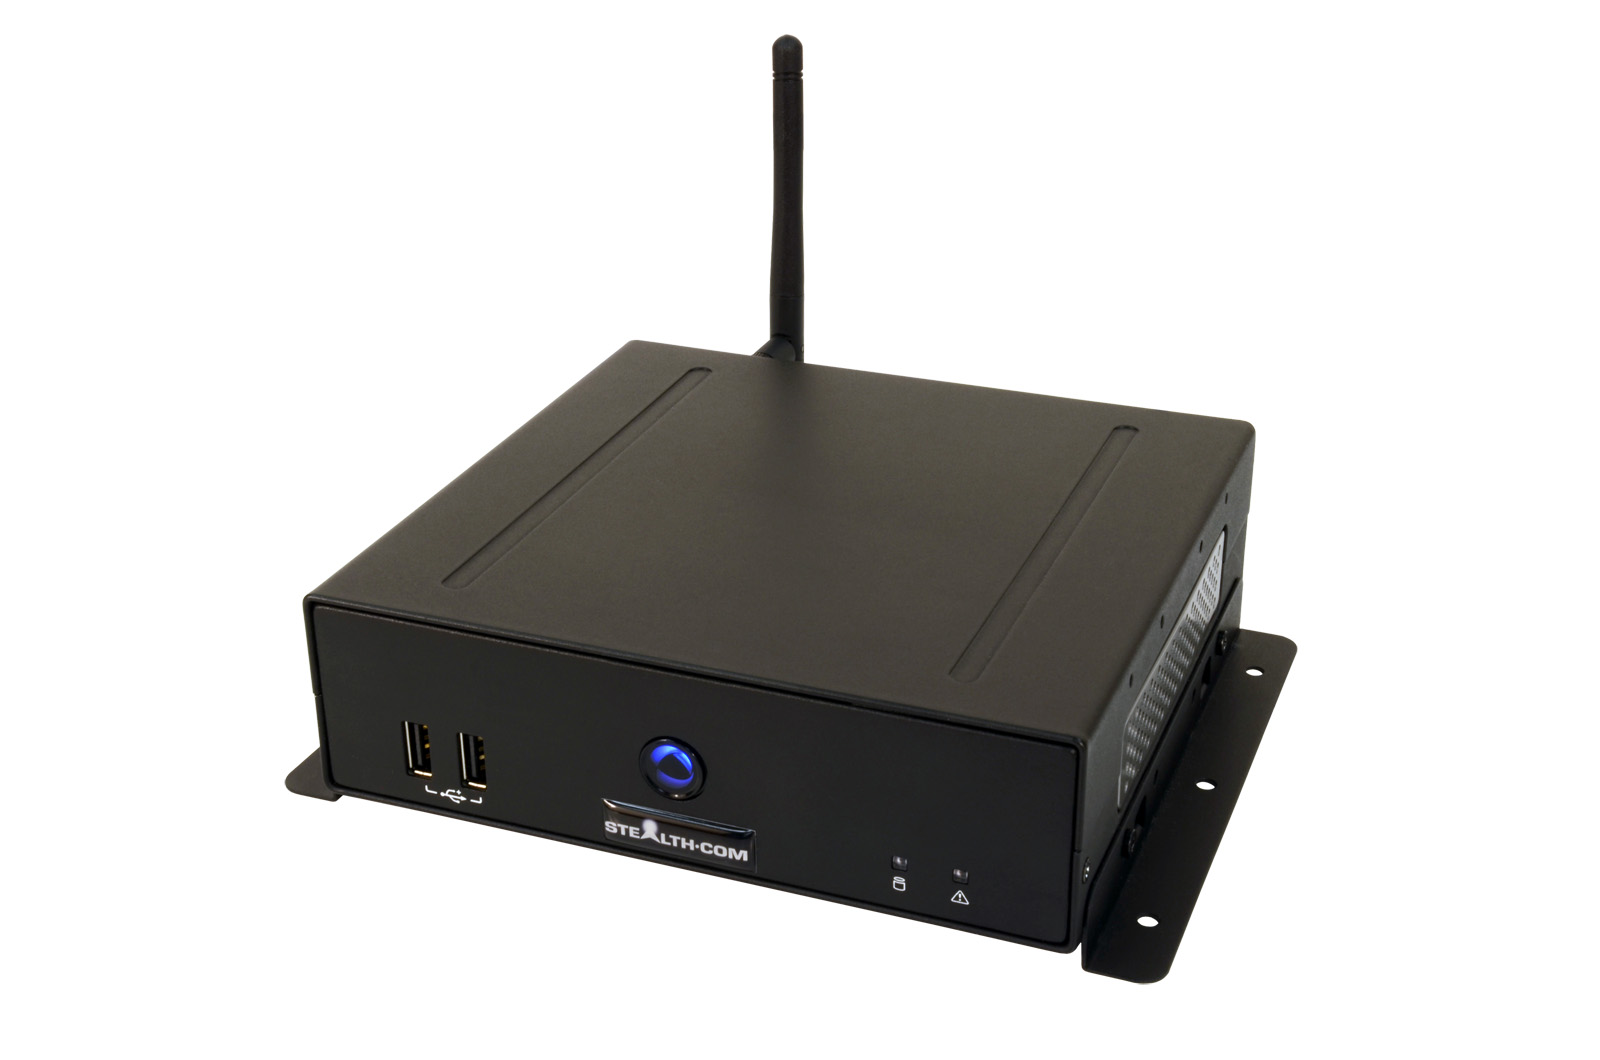 LPC-681 Mini PC - Front View with Mounting